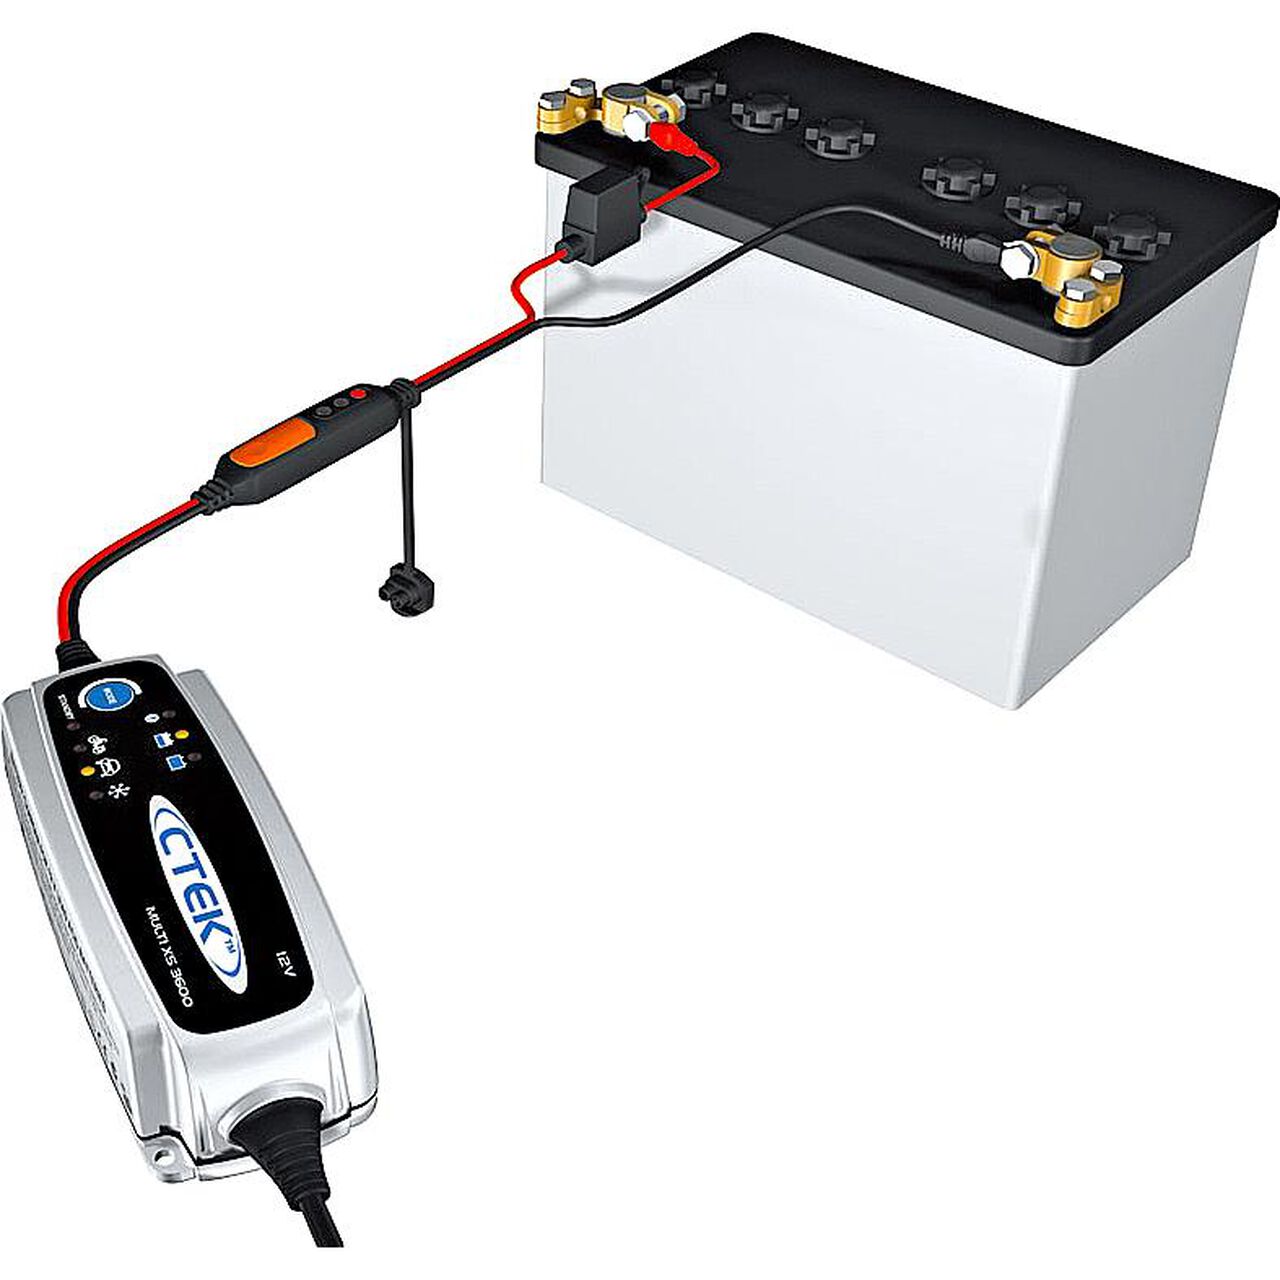 battery charger XS 0.8 EU, 12V 800mA with charge level indic